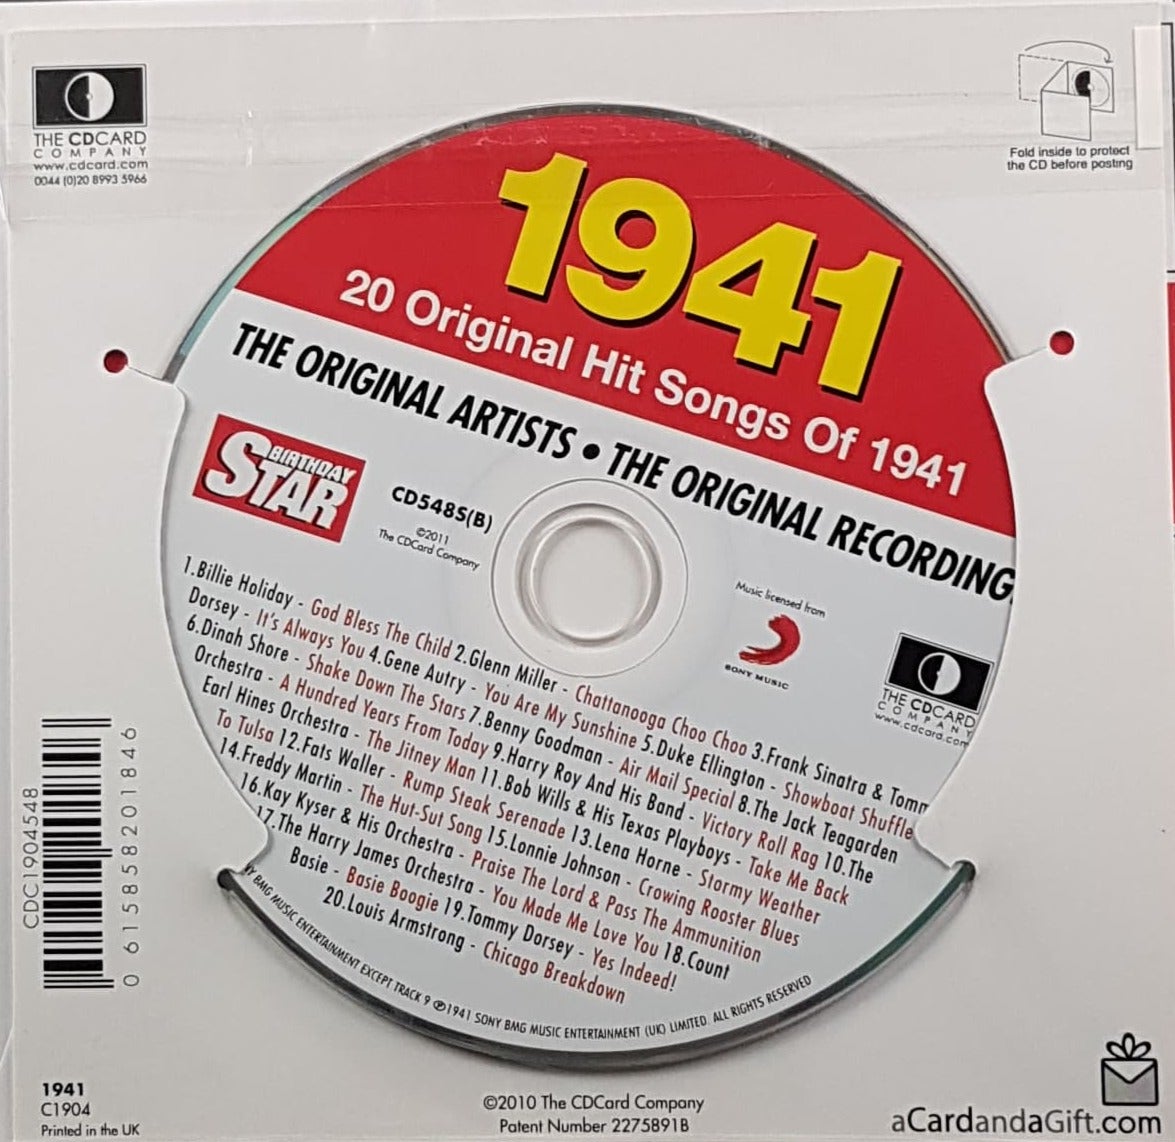 Born in year 1941 - Star (Includes CD)